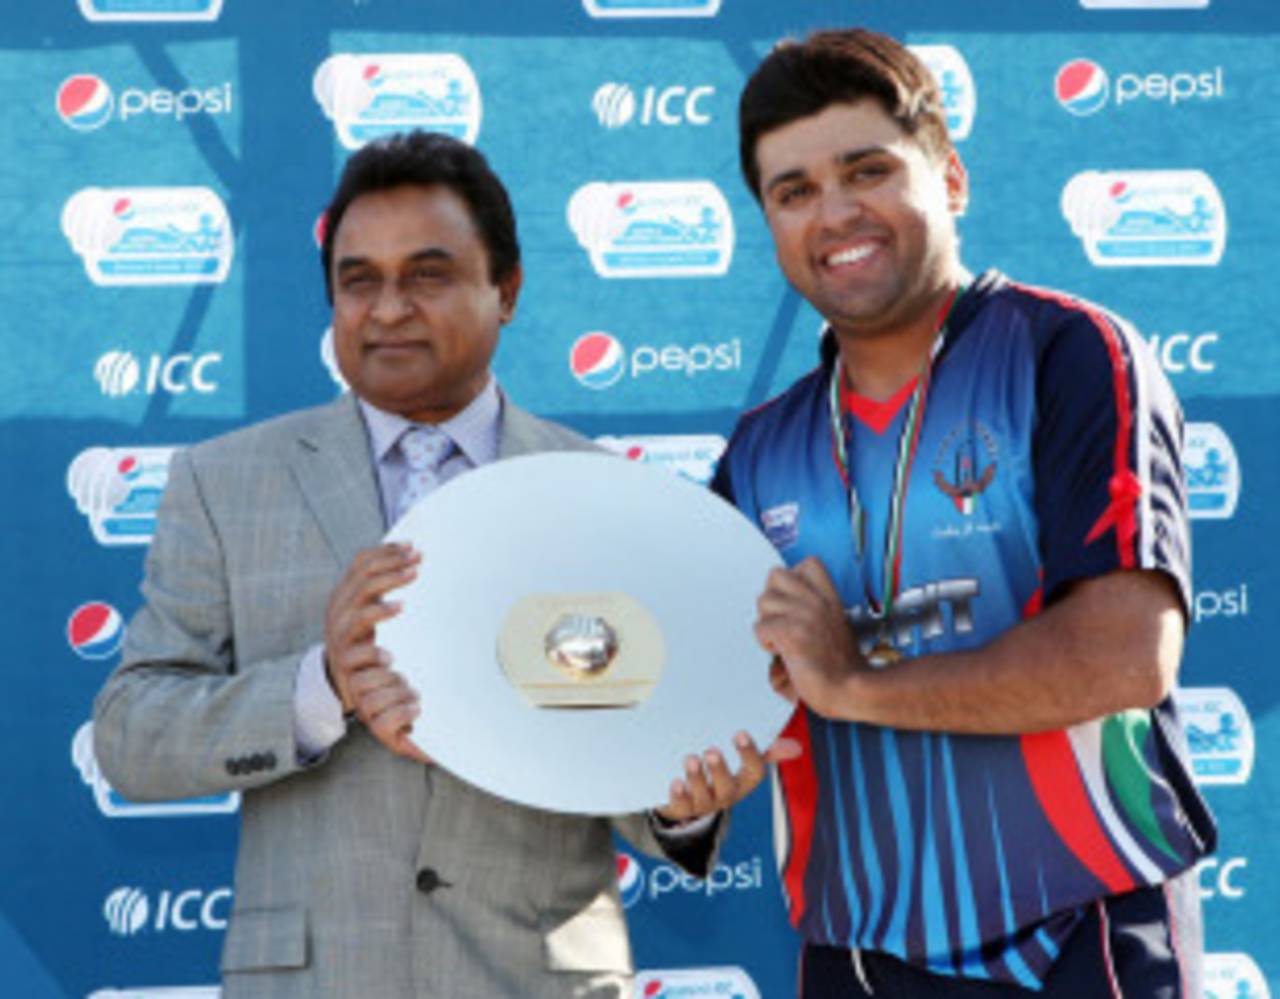 Hisham Mirza receives the WCL Division Eight trophy from ICC board director Mustafa Kamal, Kuwait v Germany, WCL Division 8 Final, Ahmadi City, November 12, 2010